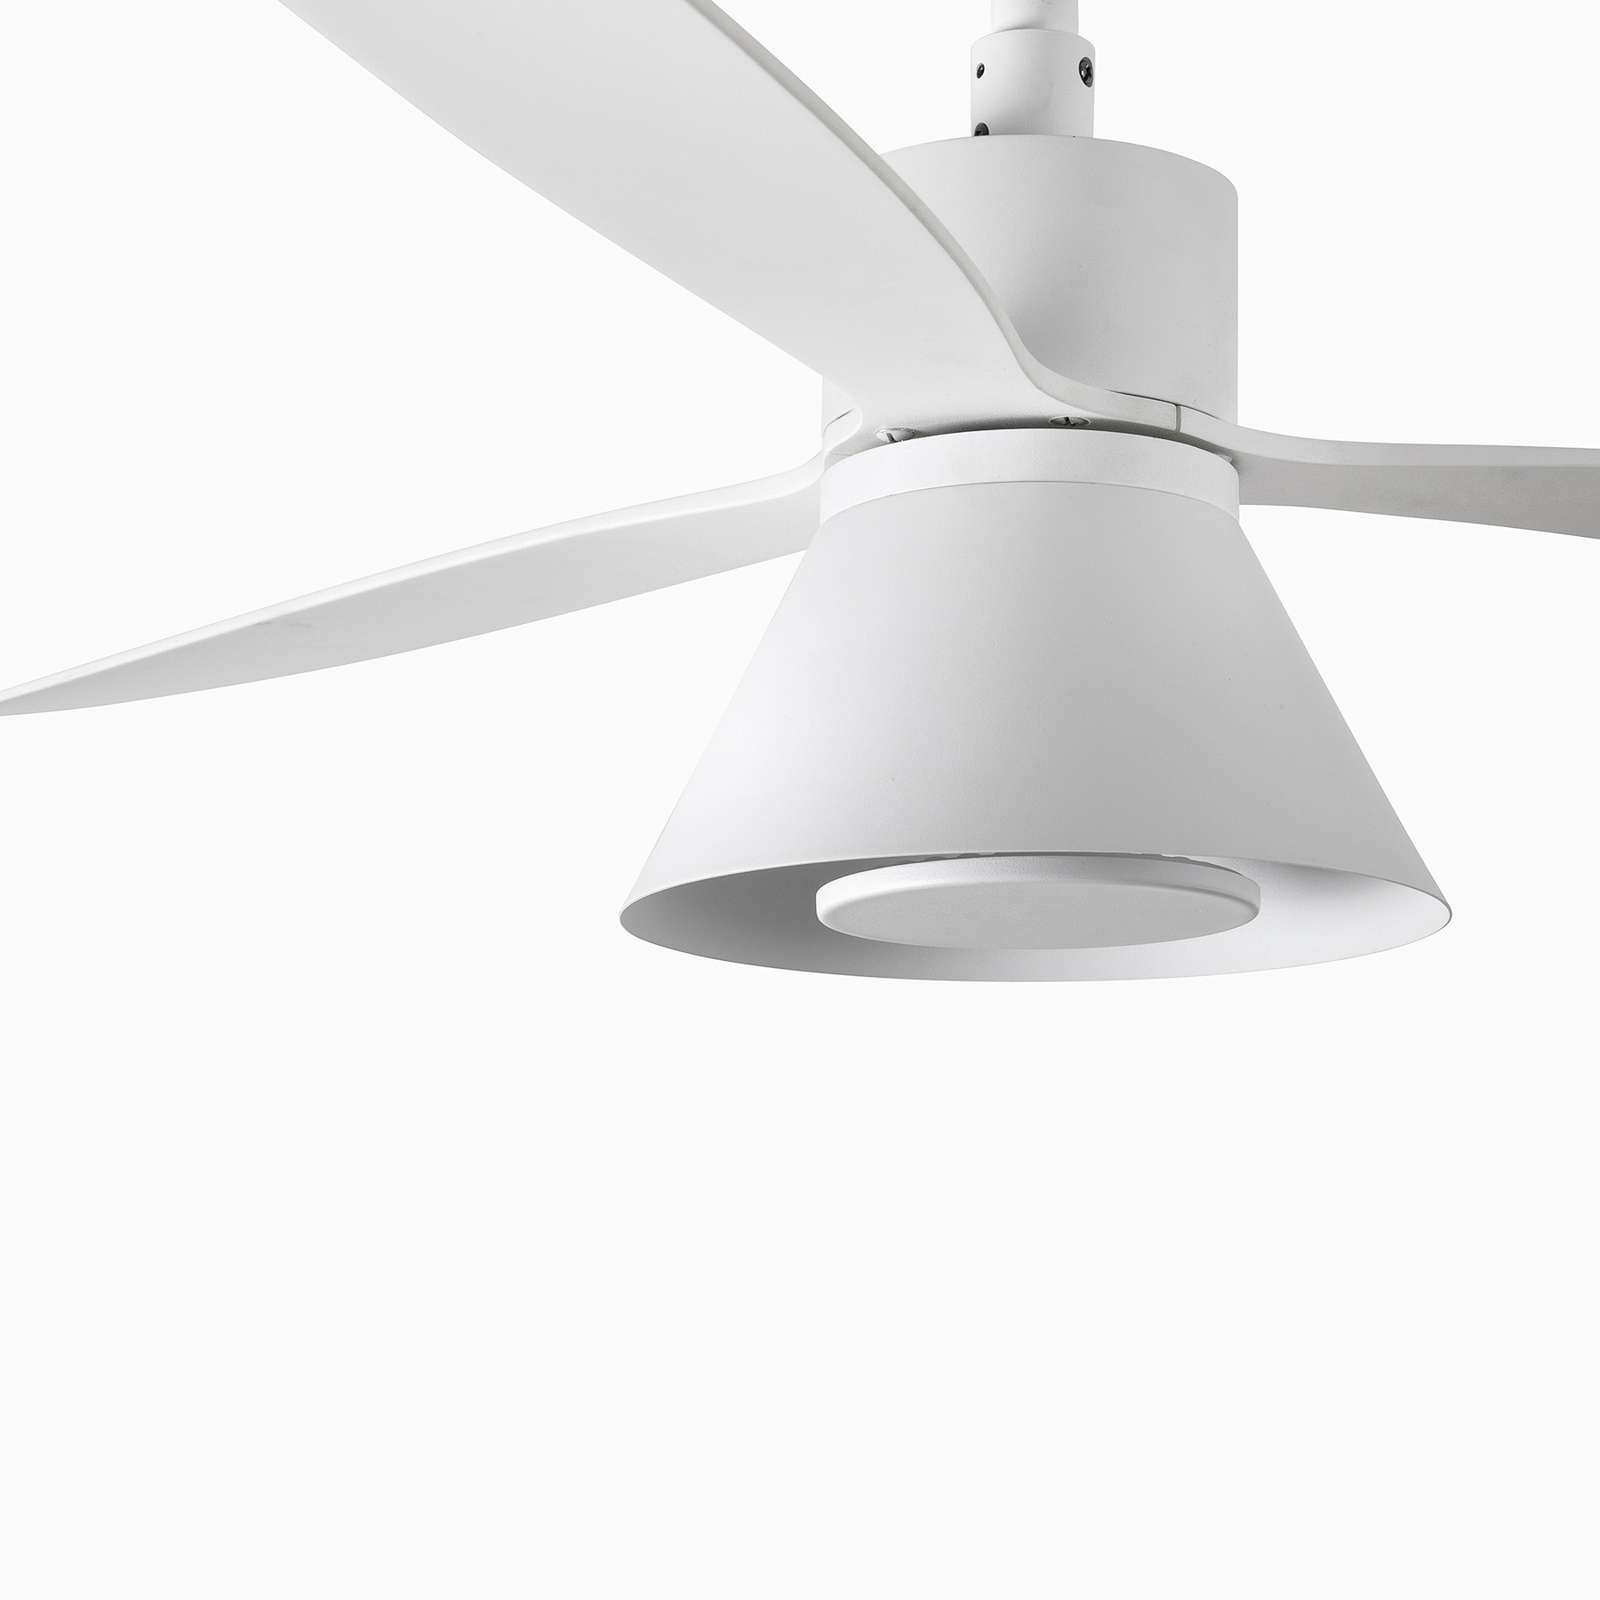 Amelia Cone ceiling fan with an LED light, white